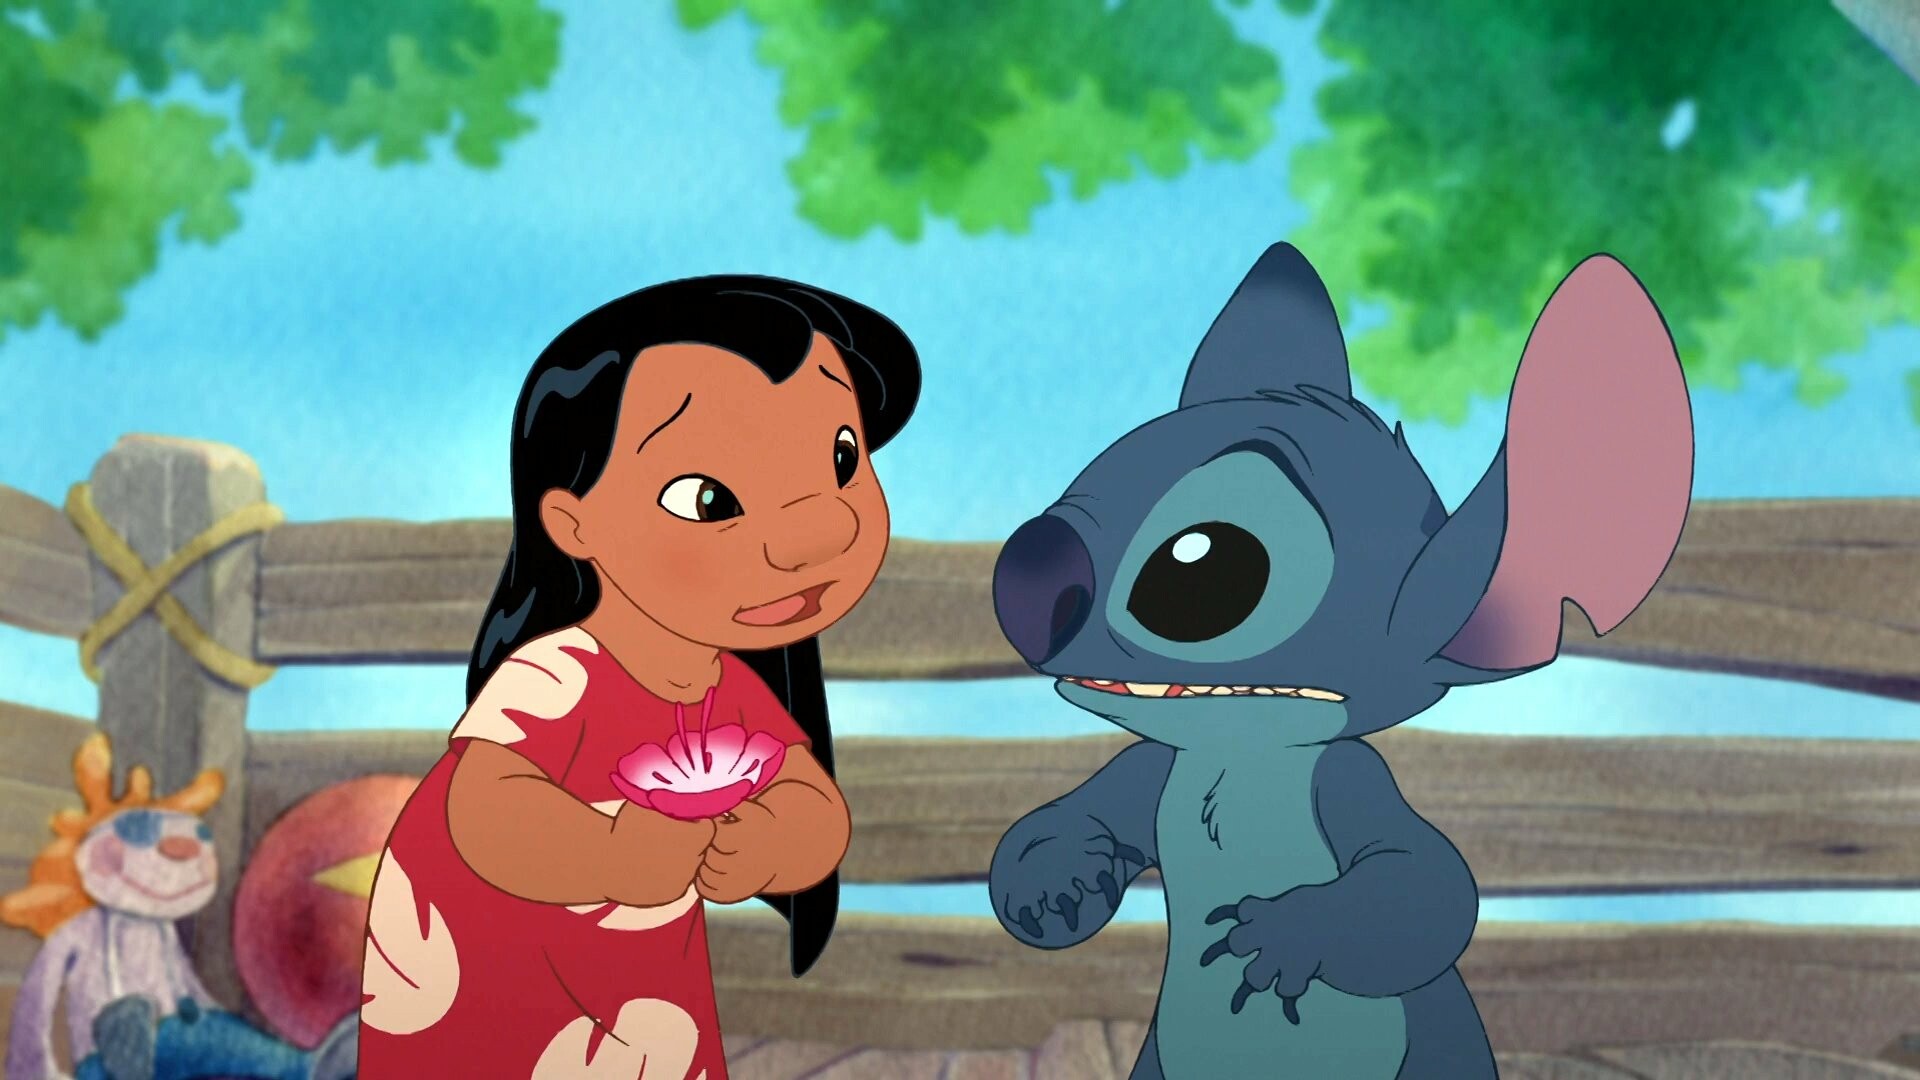 Lilo and Stitch: A 2005 American direct-to-video animated science fiction comedy-drama film. 1920x1080 Full HD Background.